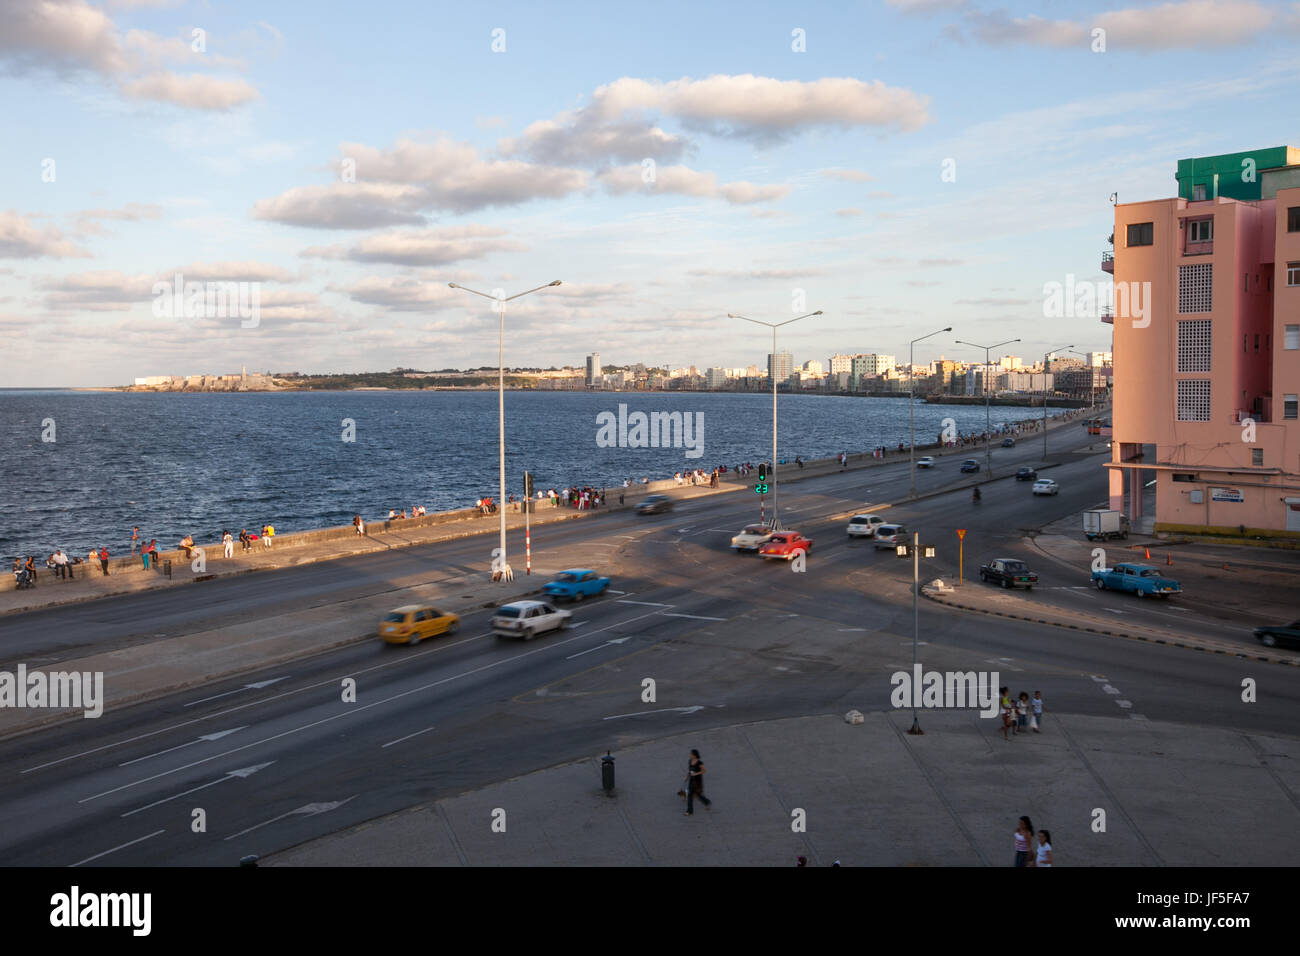 People and traffic move through a large intersection near the Malecon, a promenade along the waterfront in Havana. Stock Photo